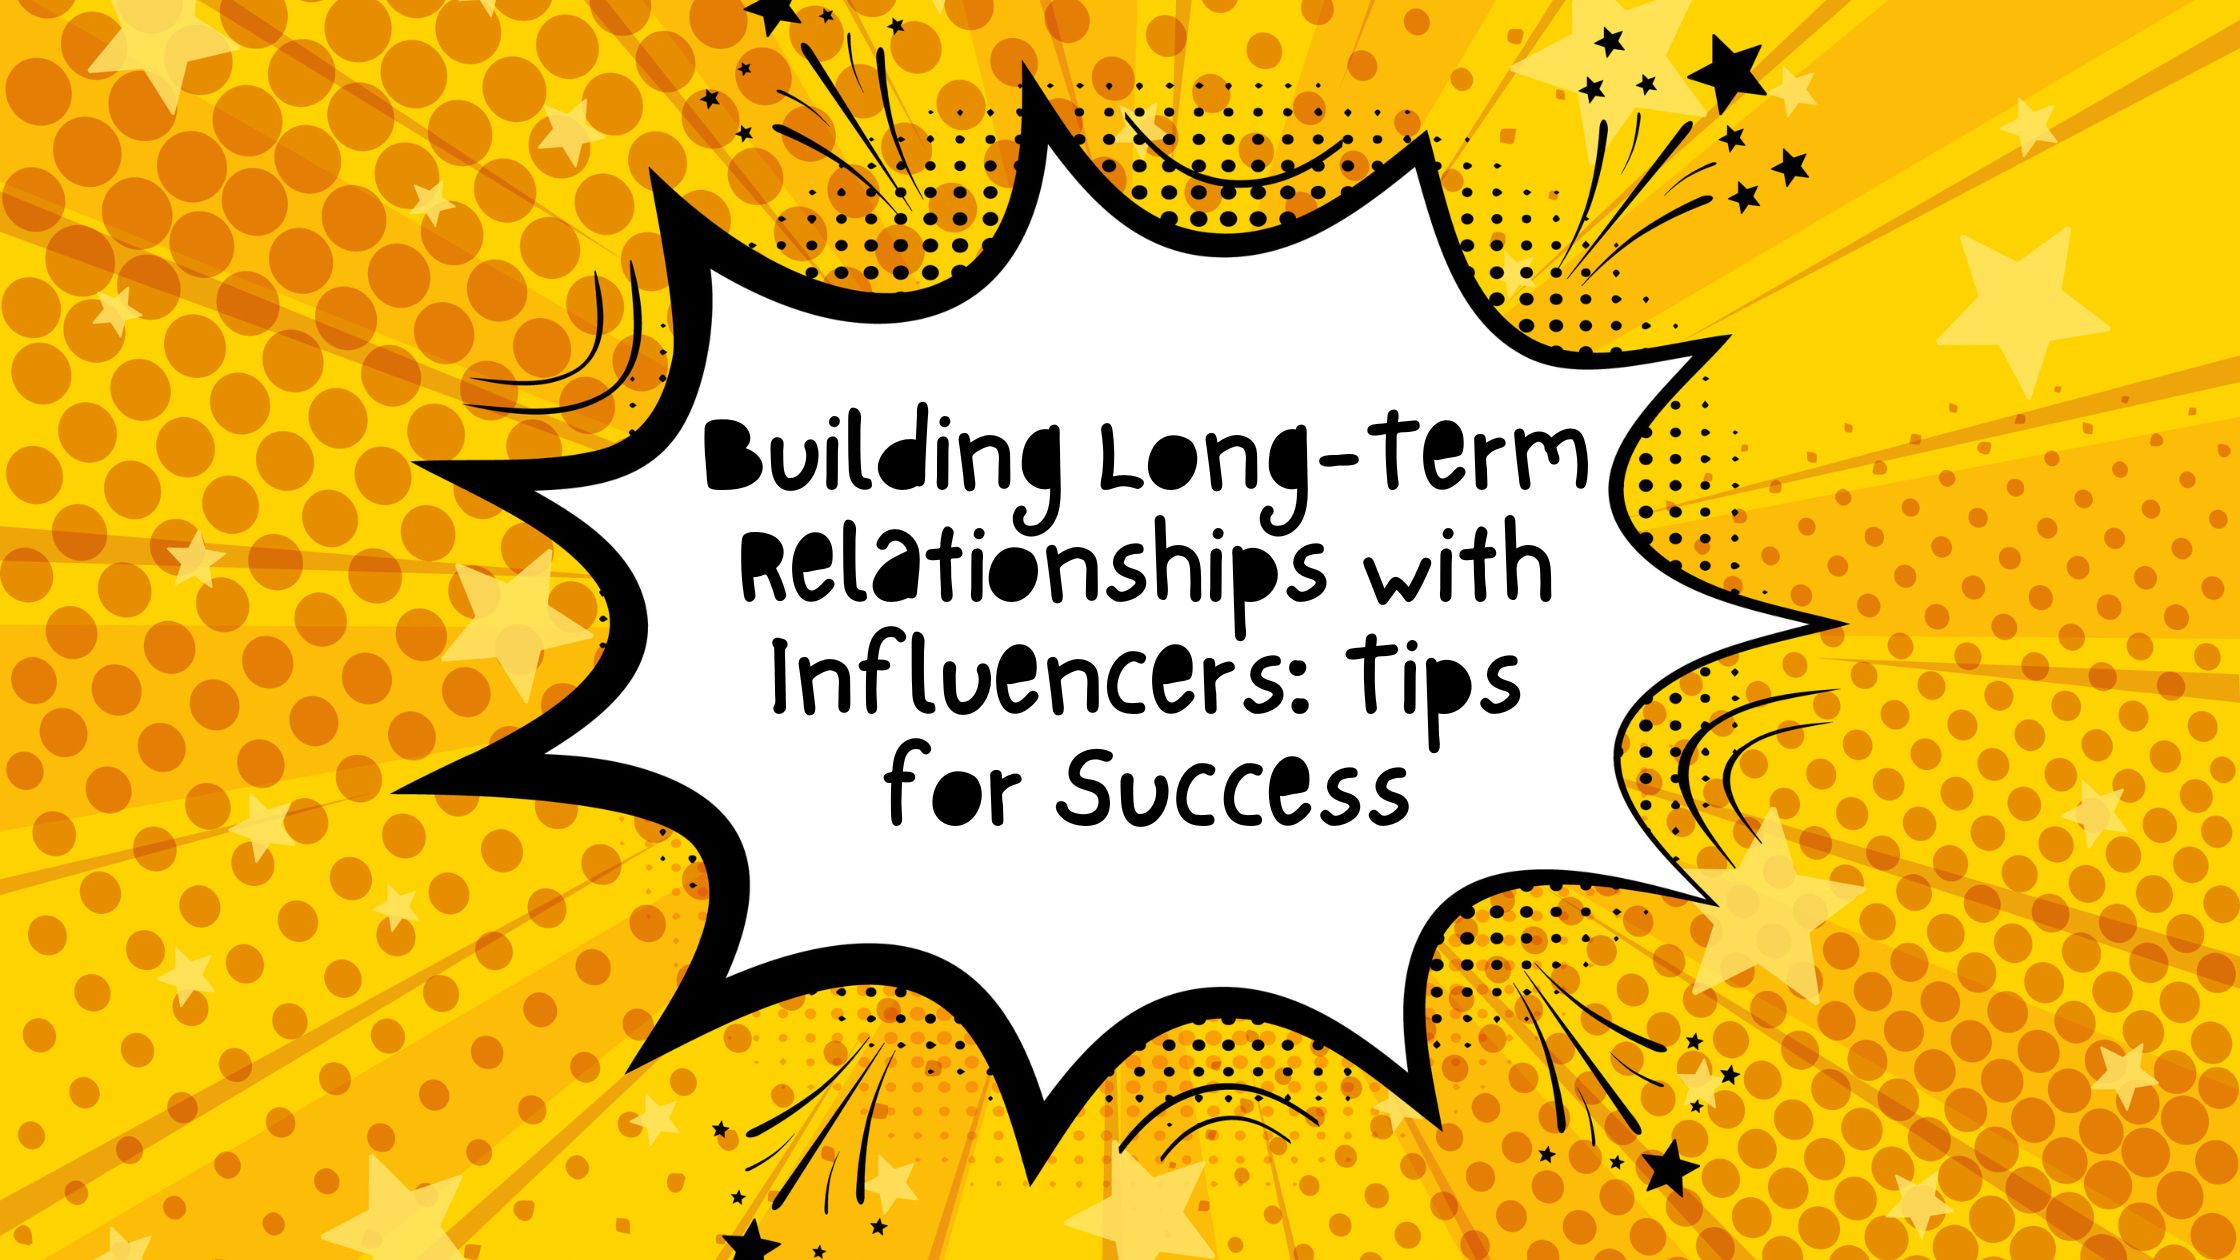 "Building Long-Term Relationships with Influencers: Tips for Success"